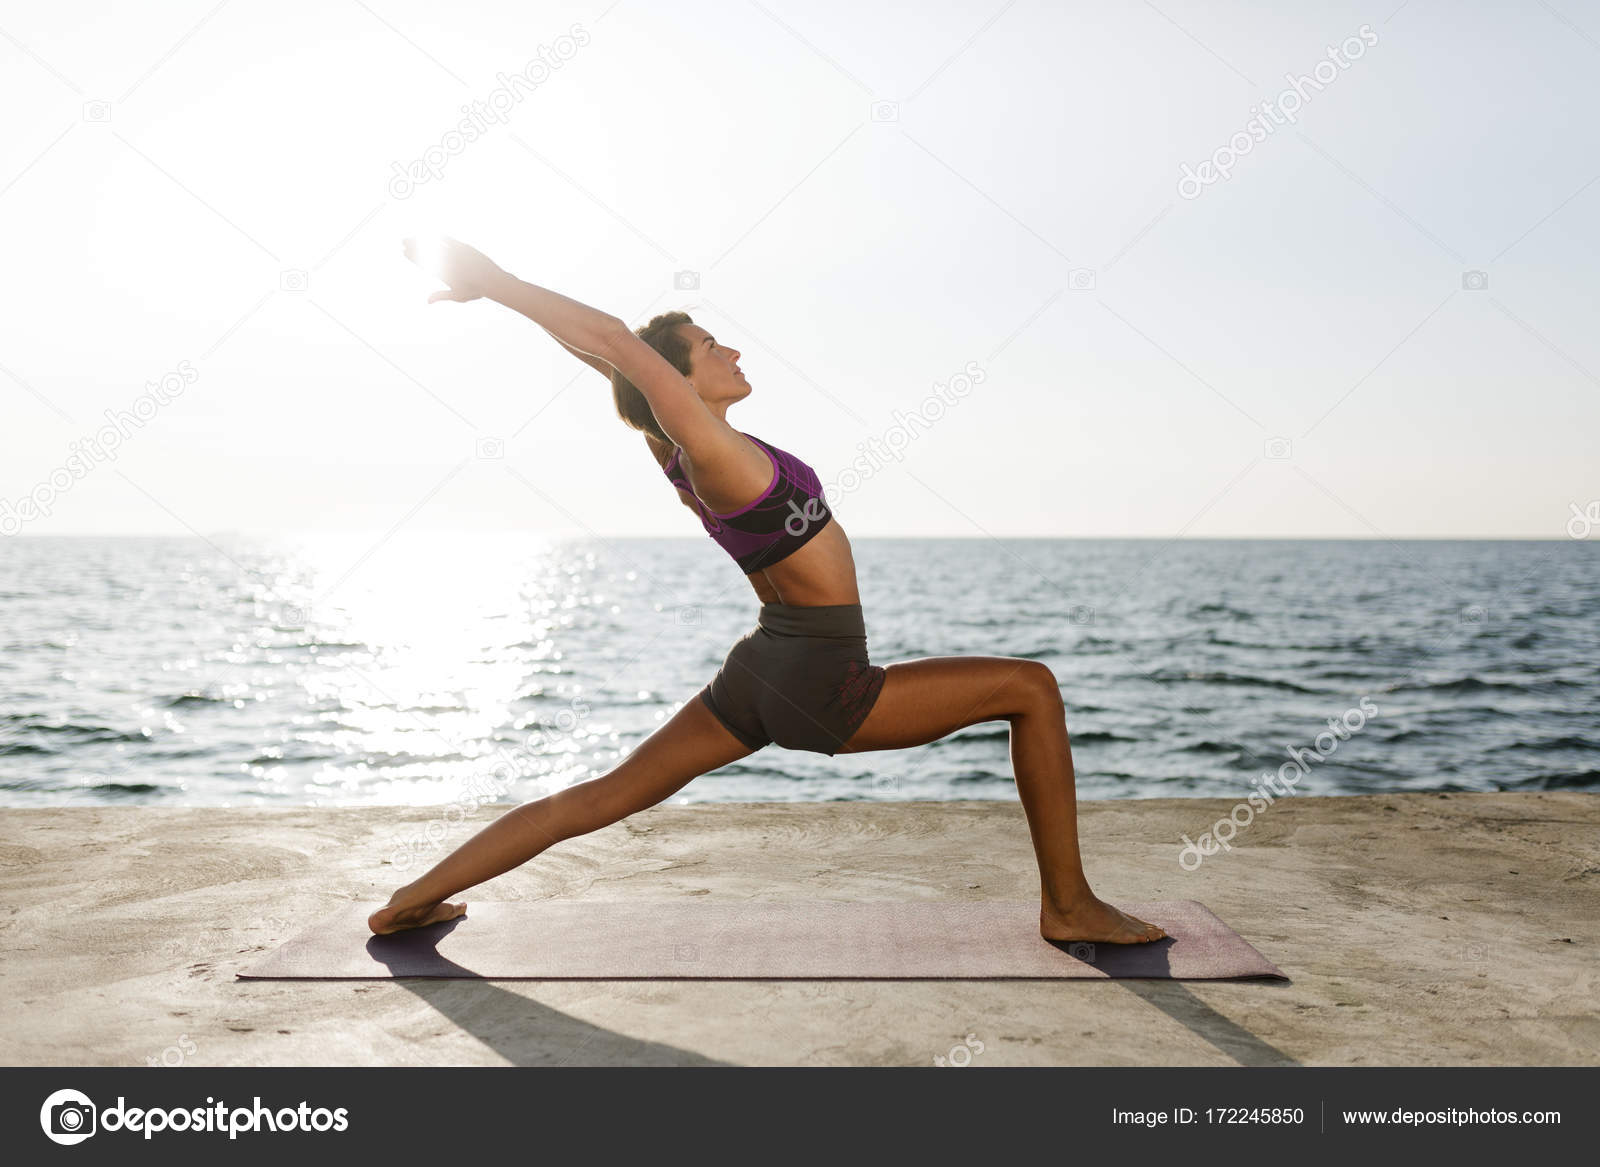 Yoga poses Images - Search Images on Everypixel